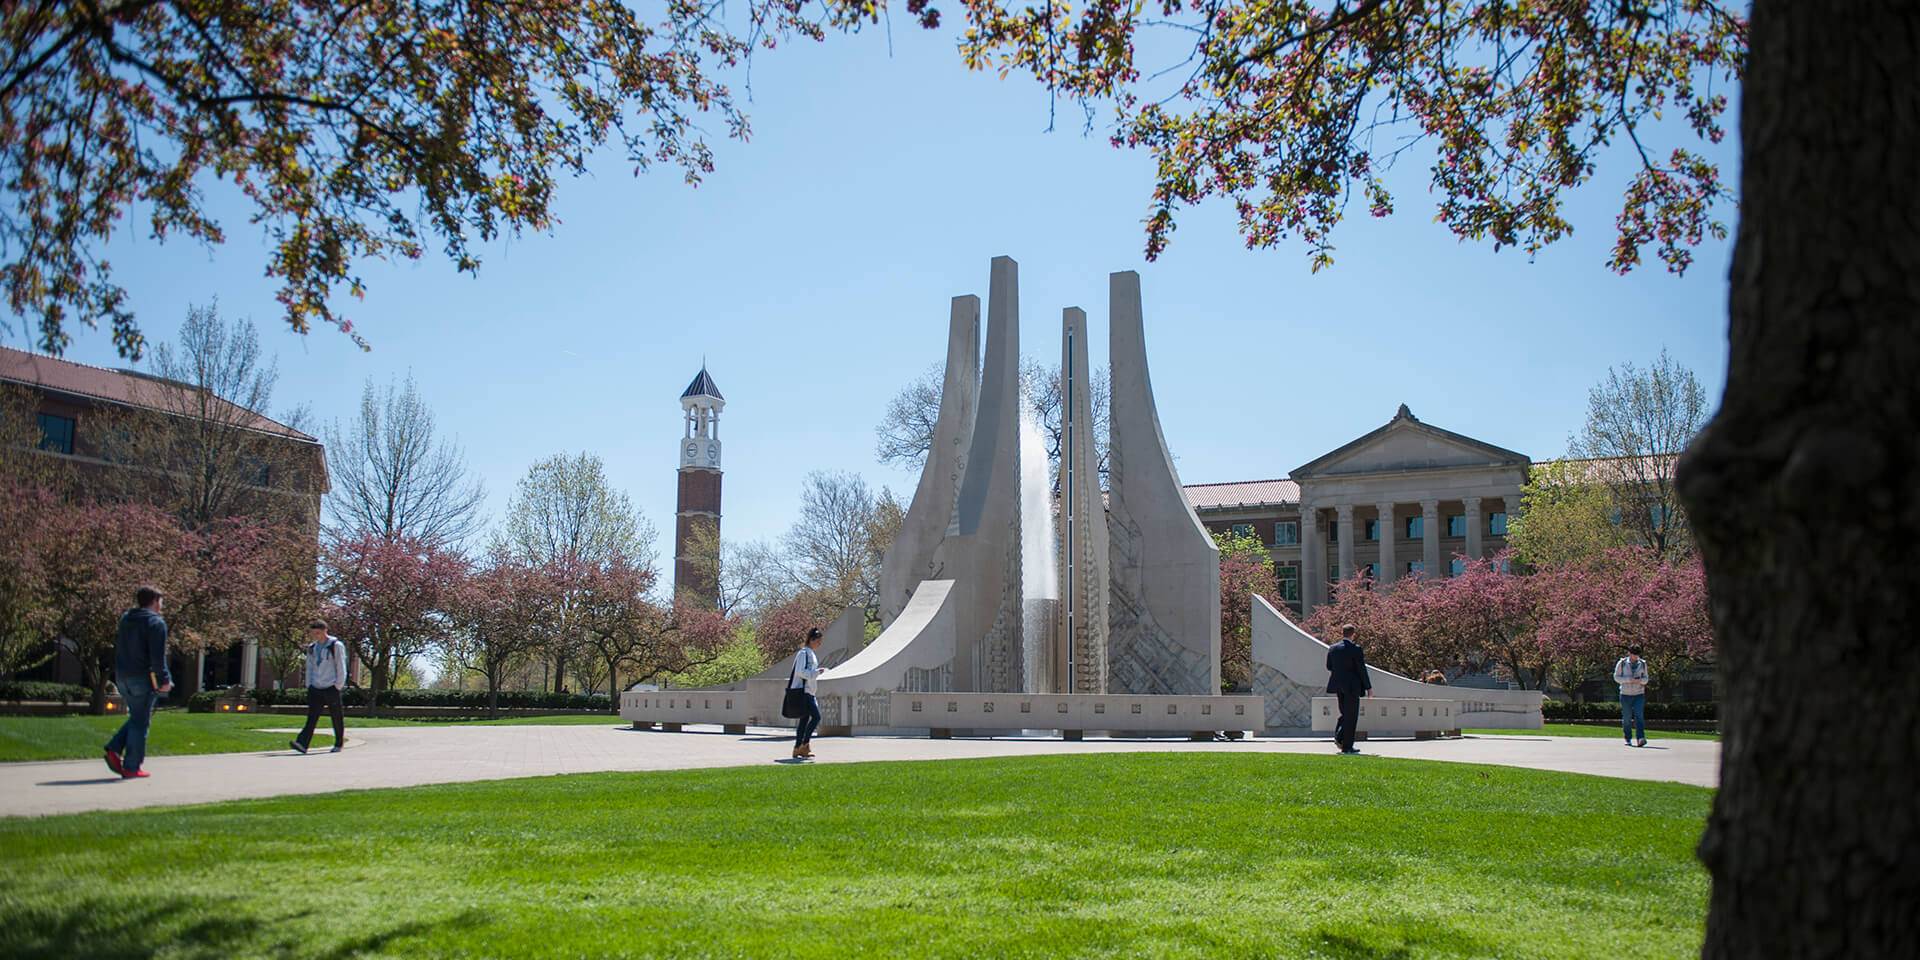 The Purdue Engineering Fountain in the spring.